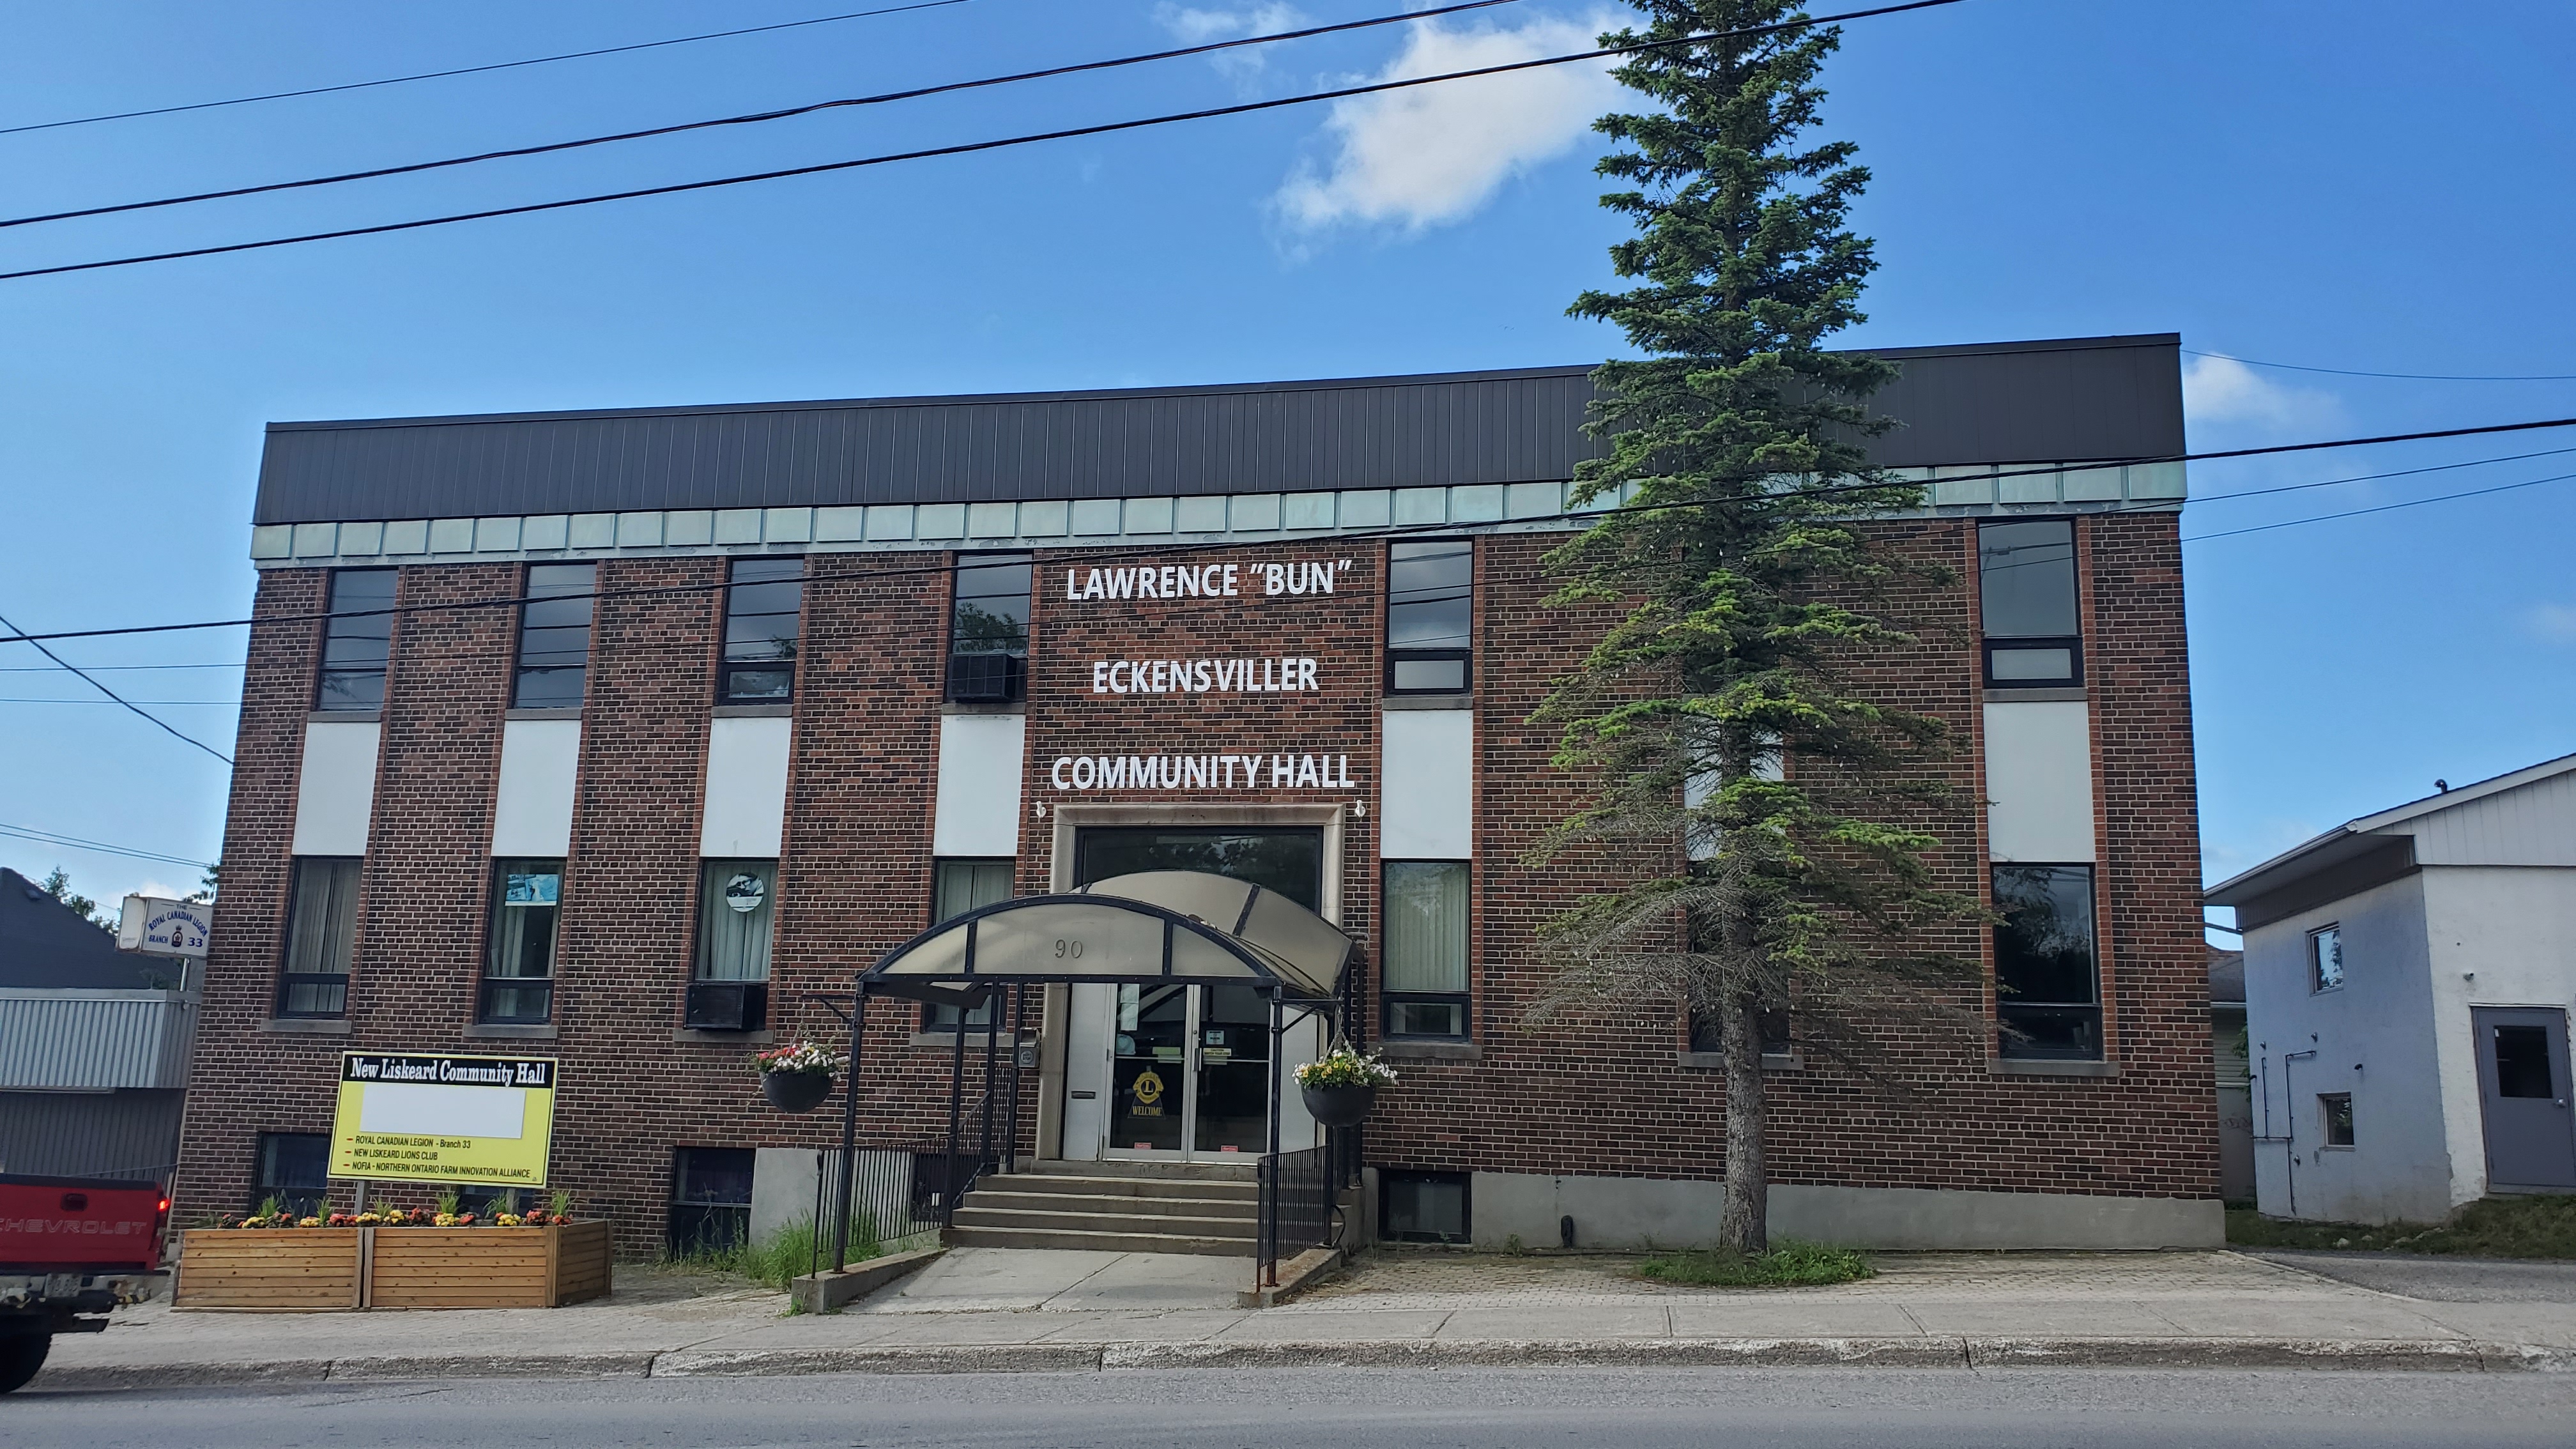 Exterior view of Lawrence Bun Eckensviller Community Hall Entrance